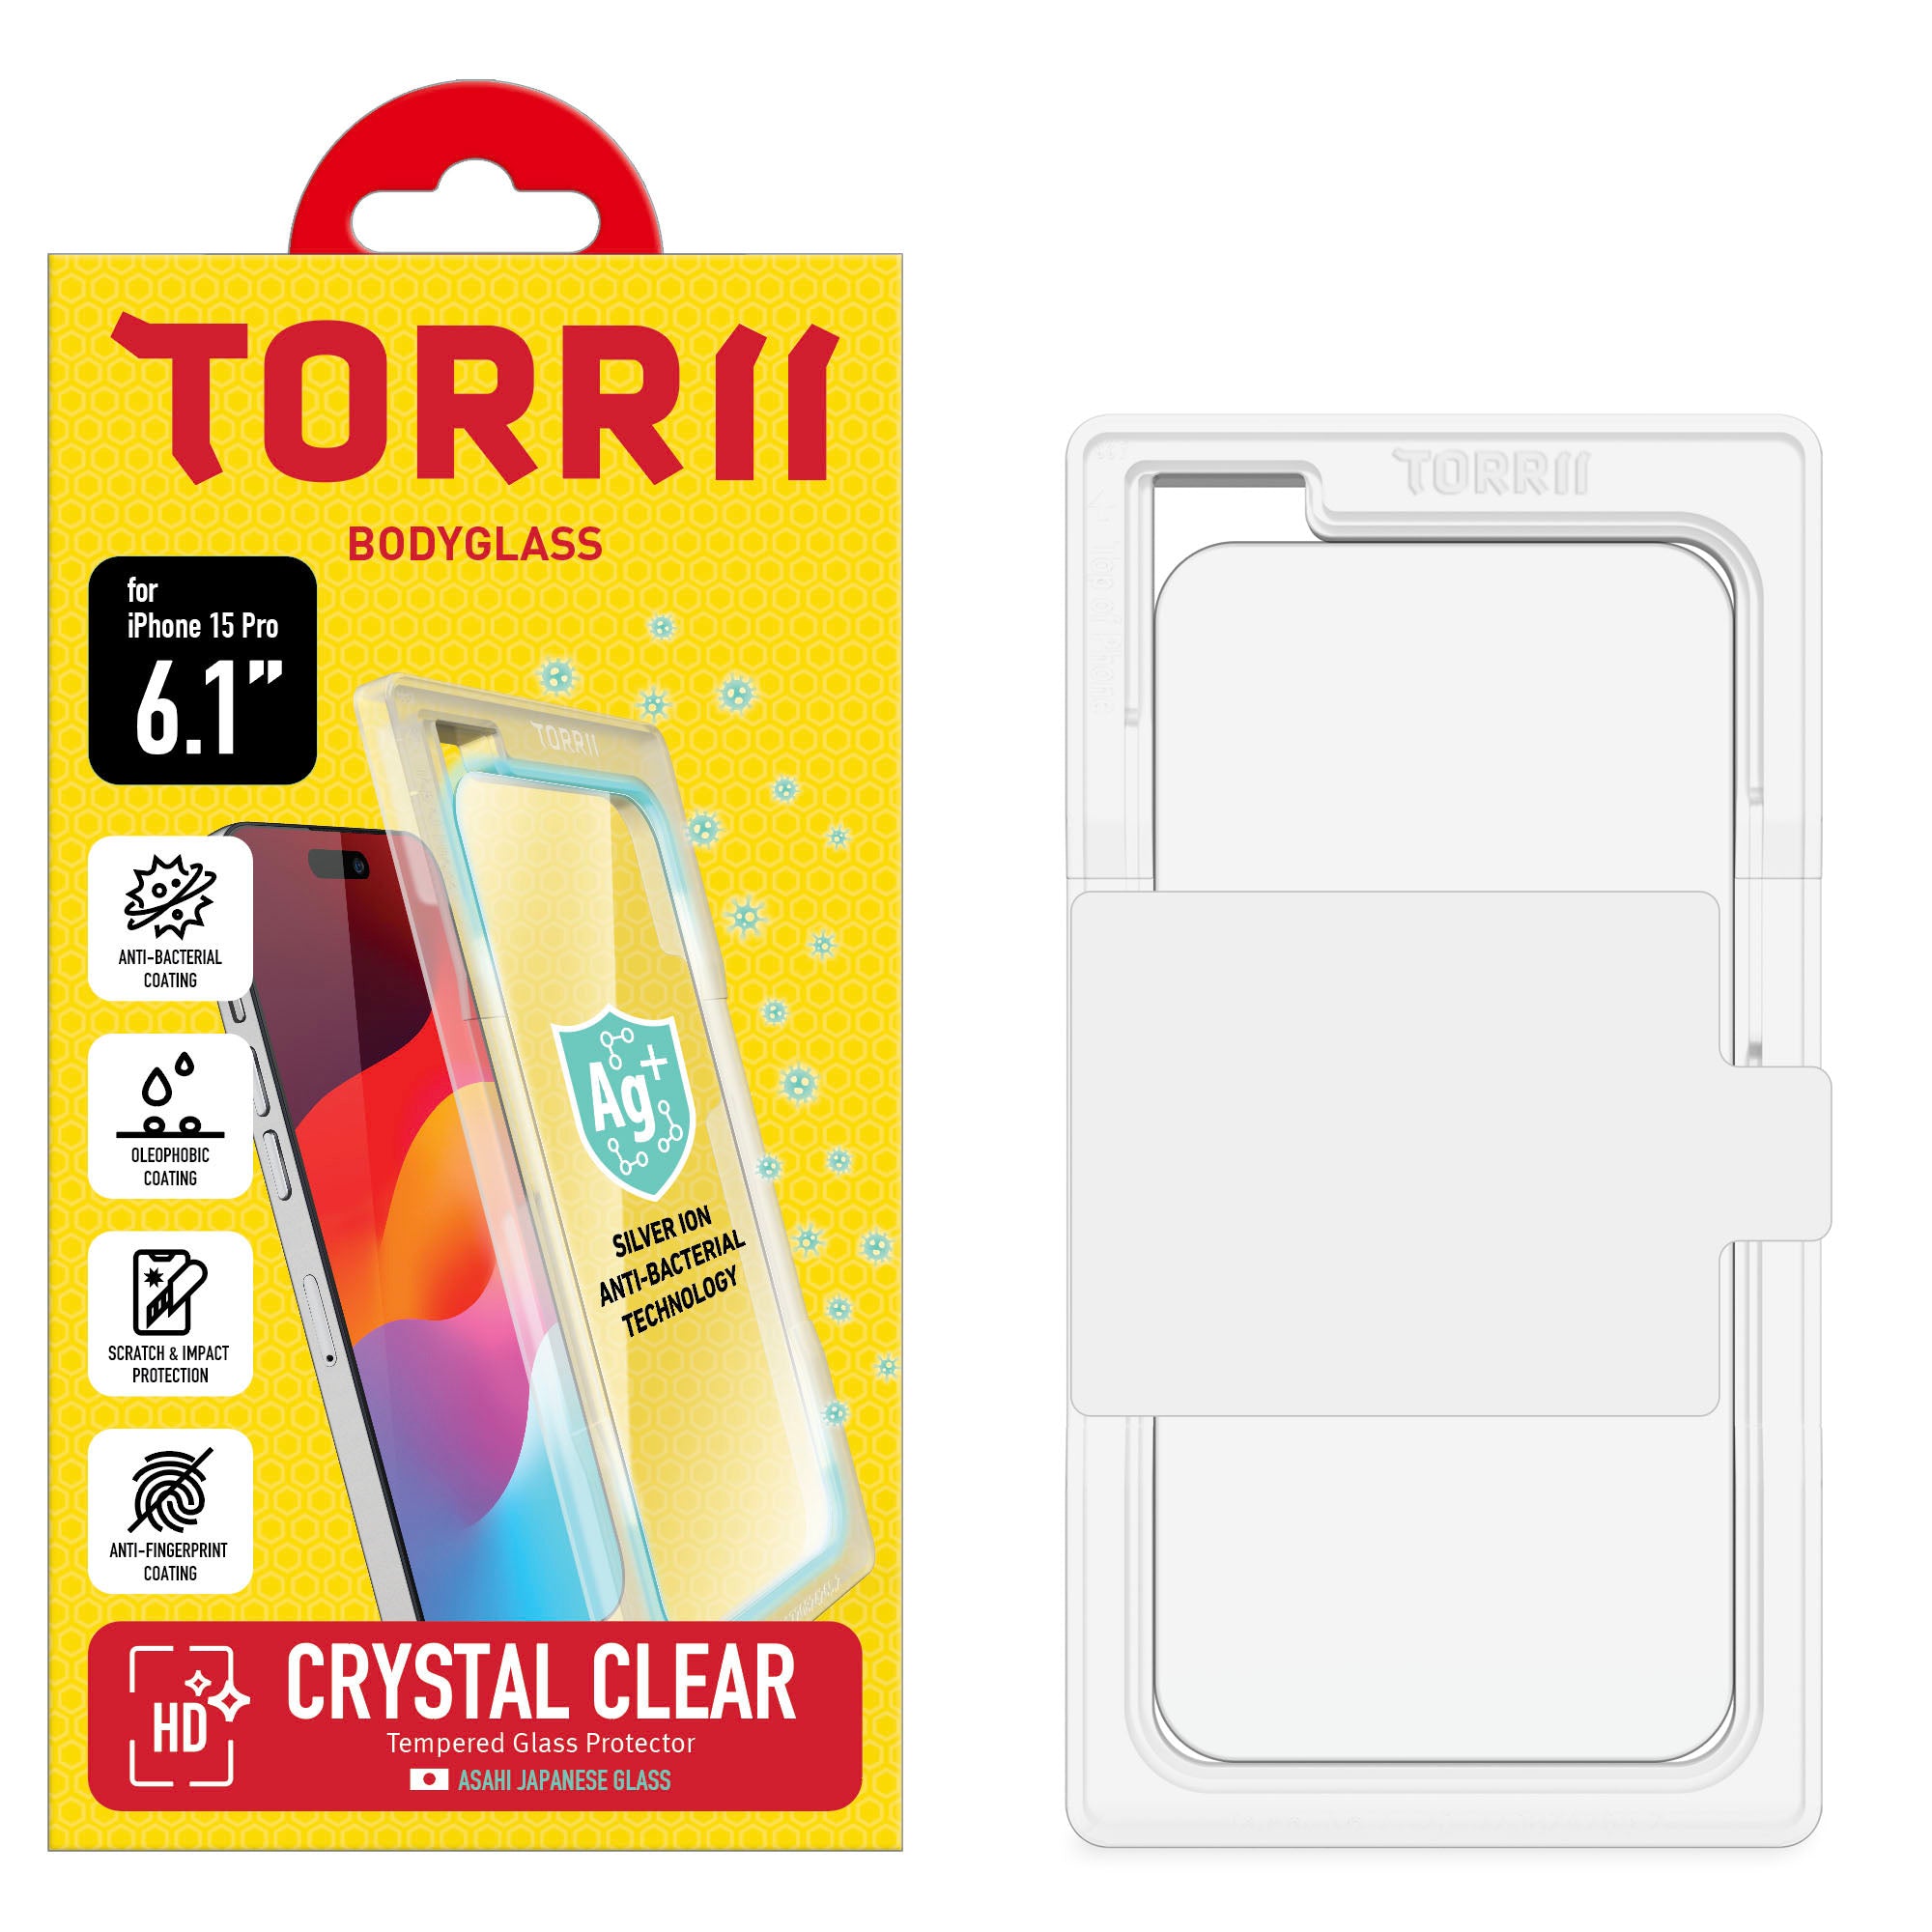 iPhone 15 Pro Torrii Bodyglass Screen Protector Anti-Bacterial Coating - Clear